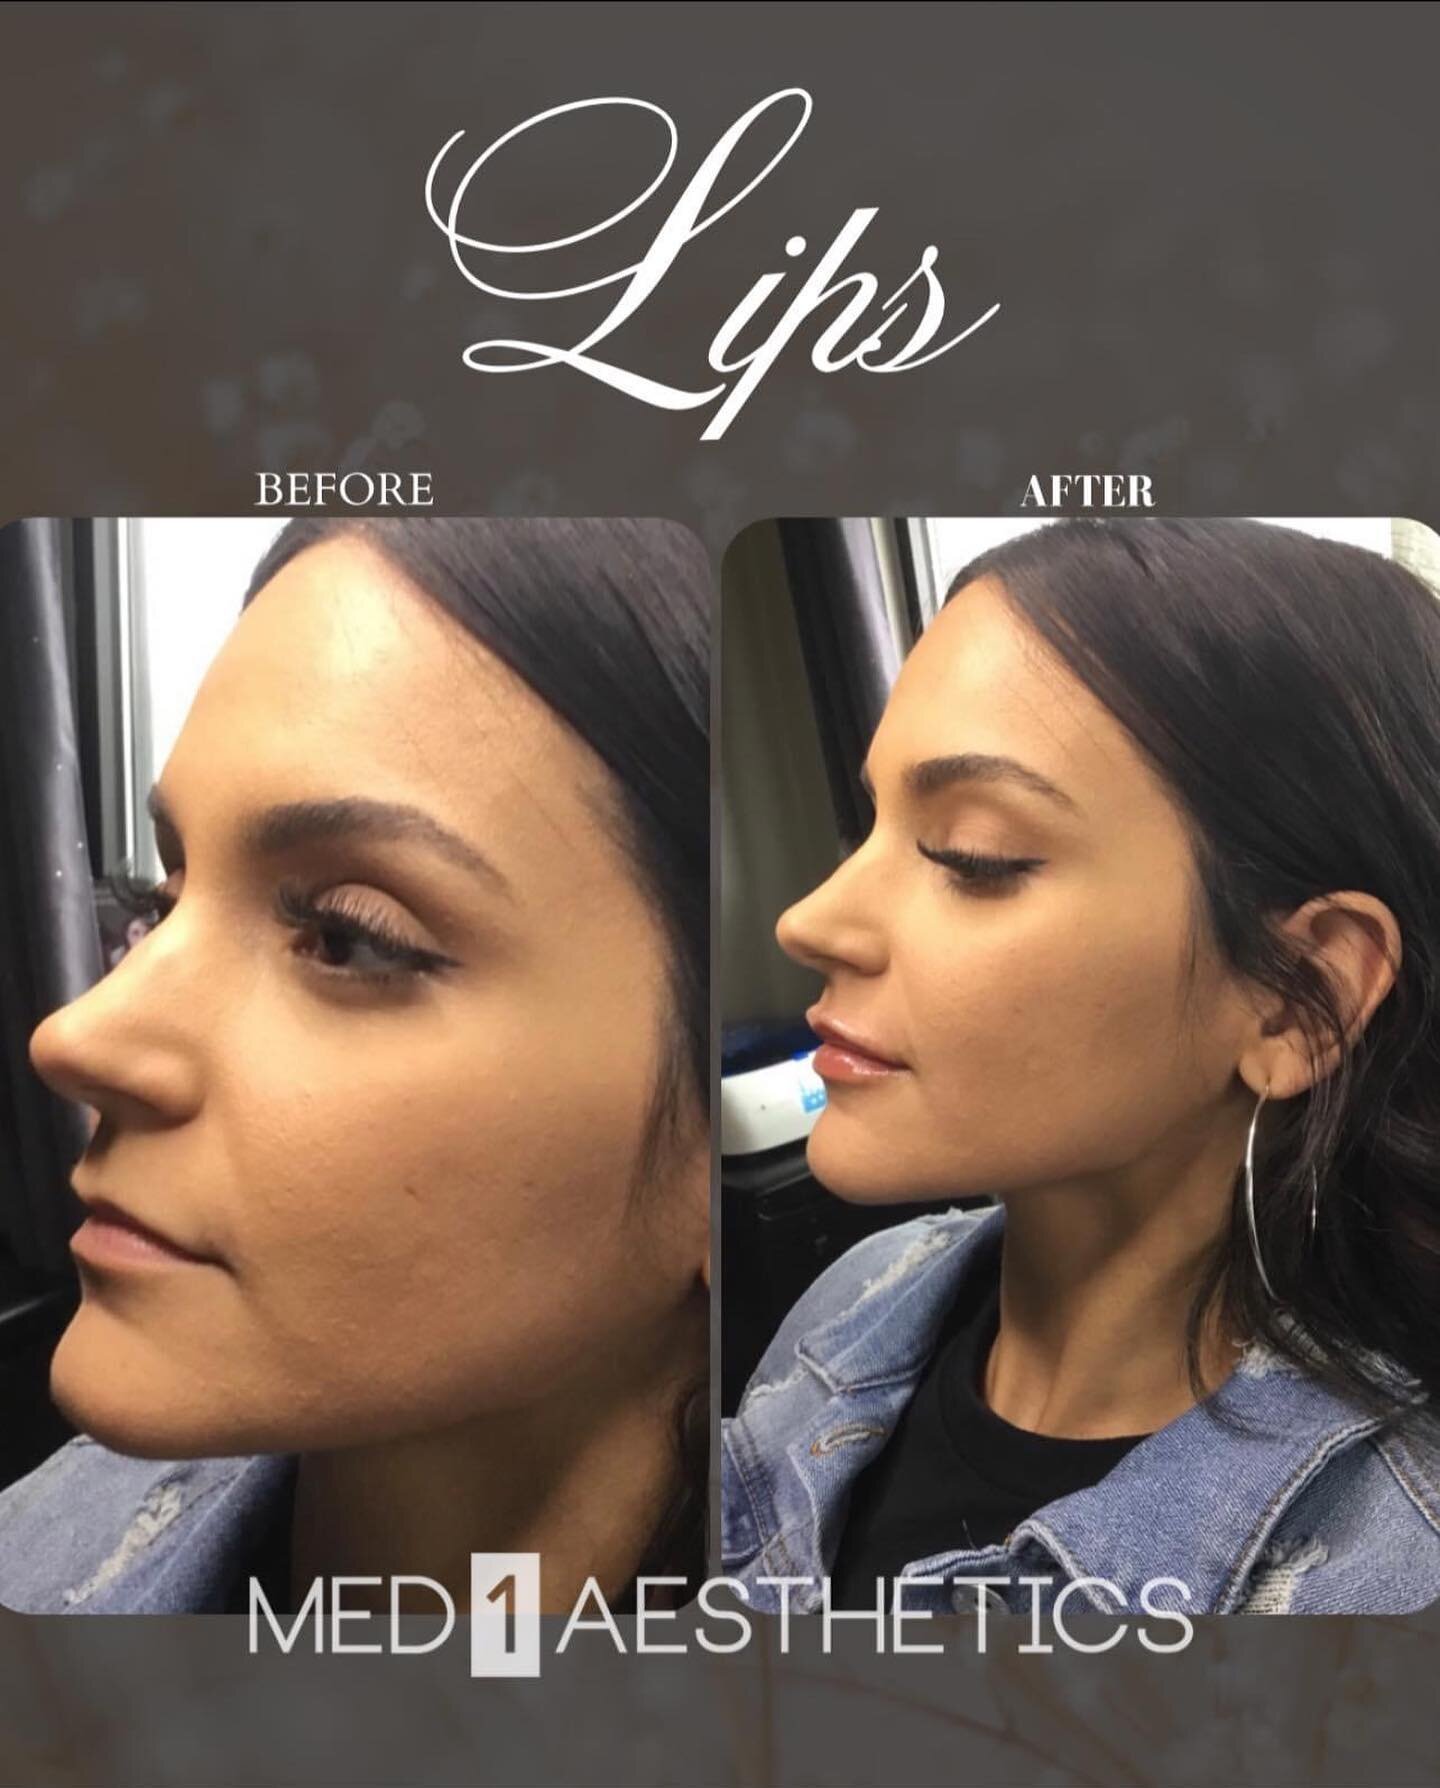 𝐵𝑒𝓈𝓅𝑜𝓀𝑒 𝐿𝒾𝓅𝓈

Lips should never be viewed as &ldquo;one size fits all&rdquo;. 
RN, Nurse Injector, Peggy burns will work to understand your desired outcome, and create a perfectly balanced lip shape that&rsquo;s tailored to your needs. 

T